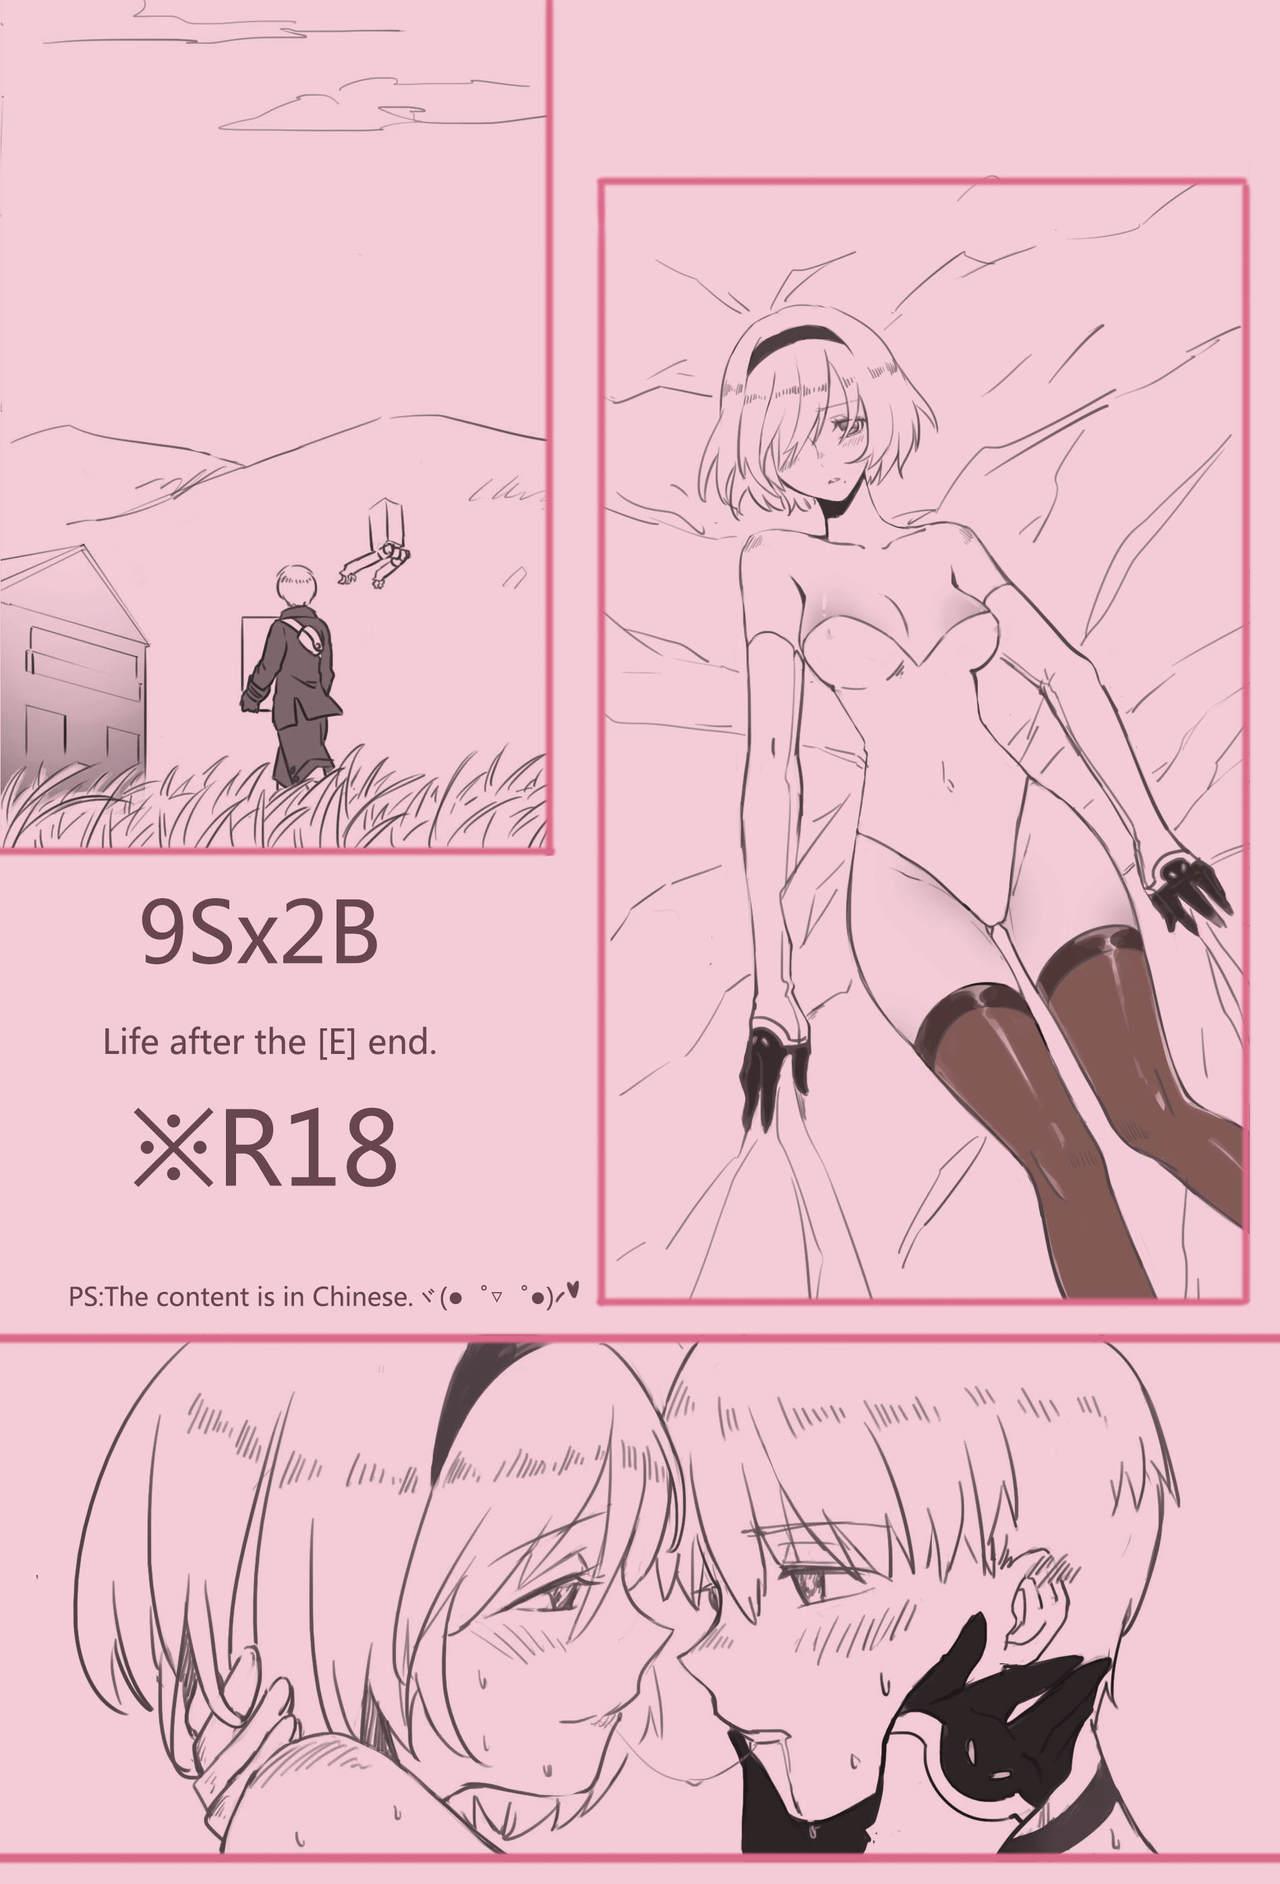 [WS] 9Sx2B - Life after the [E] end. (NieR:Automata) [Chinese] 0